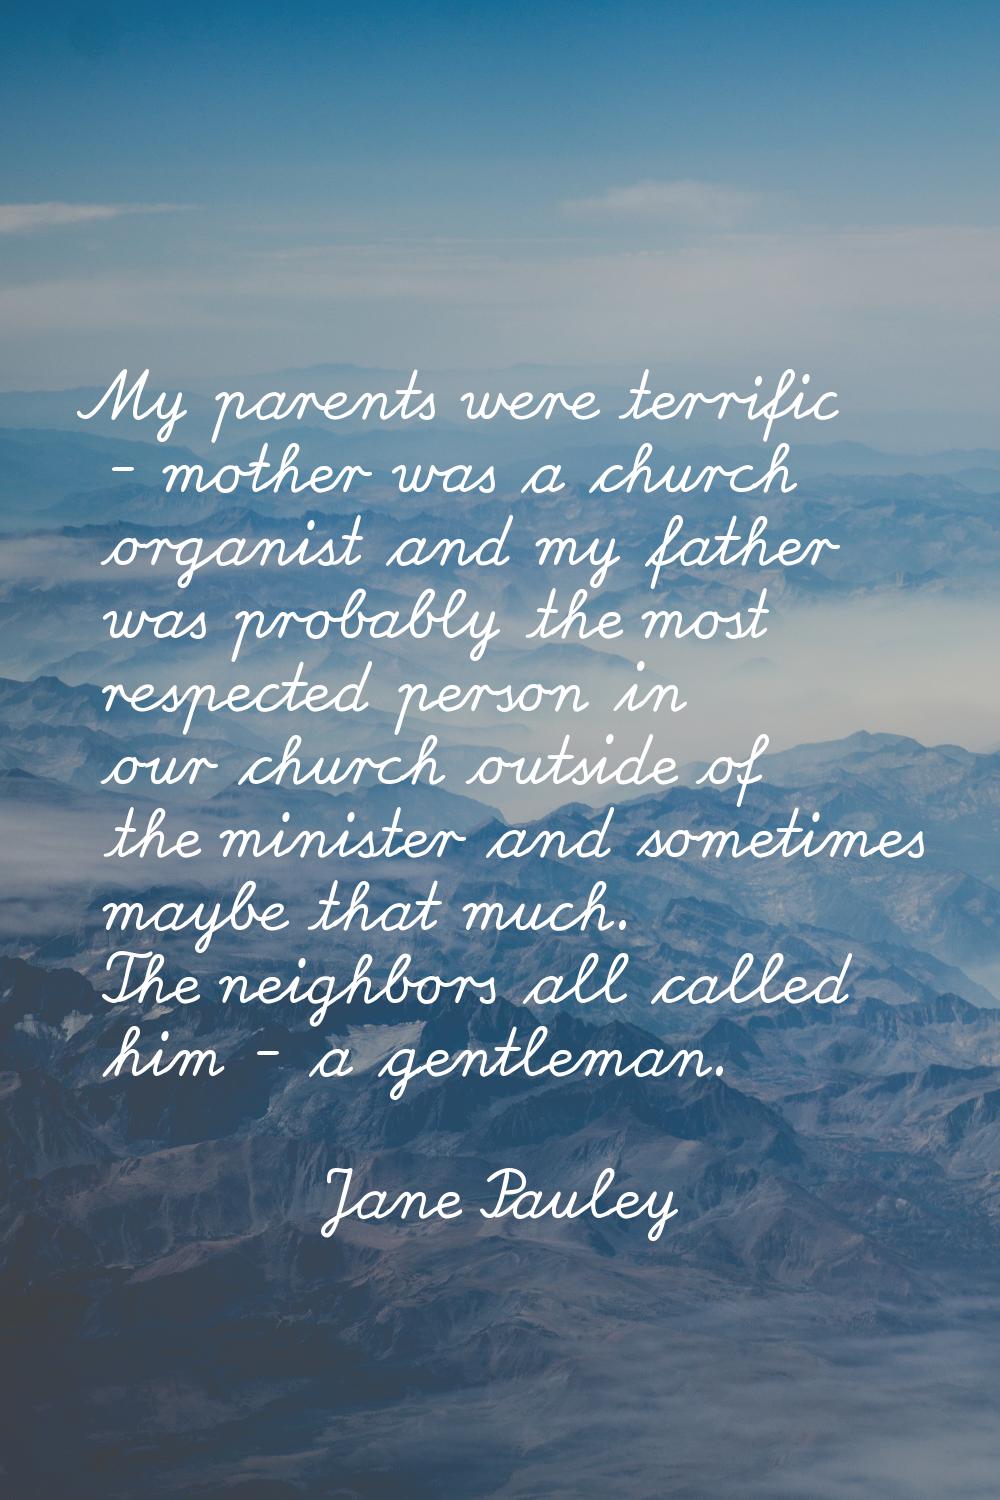 My parents were terrific - mother was a church organist and my father was probably the most respect